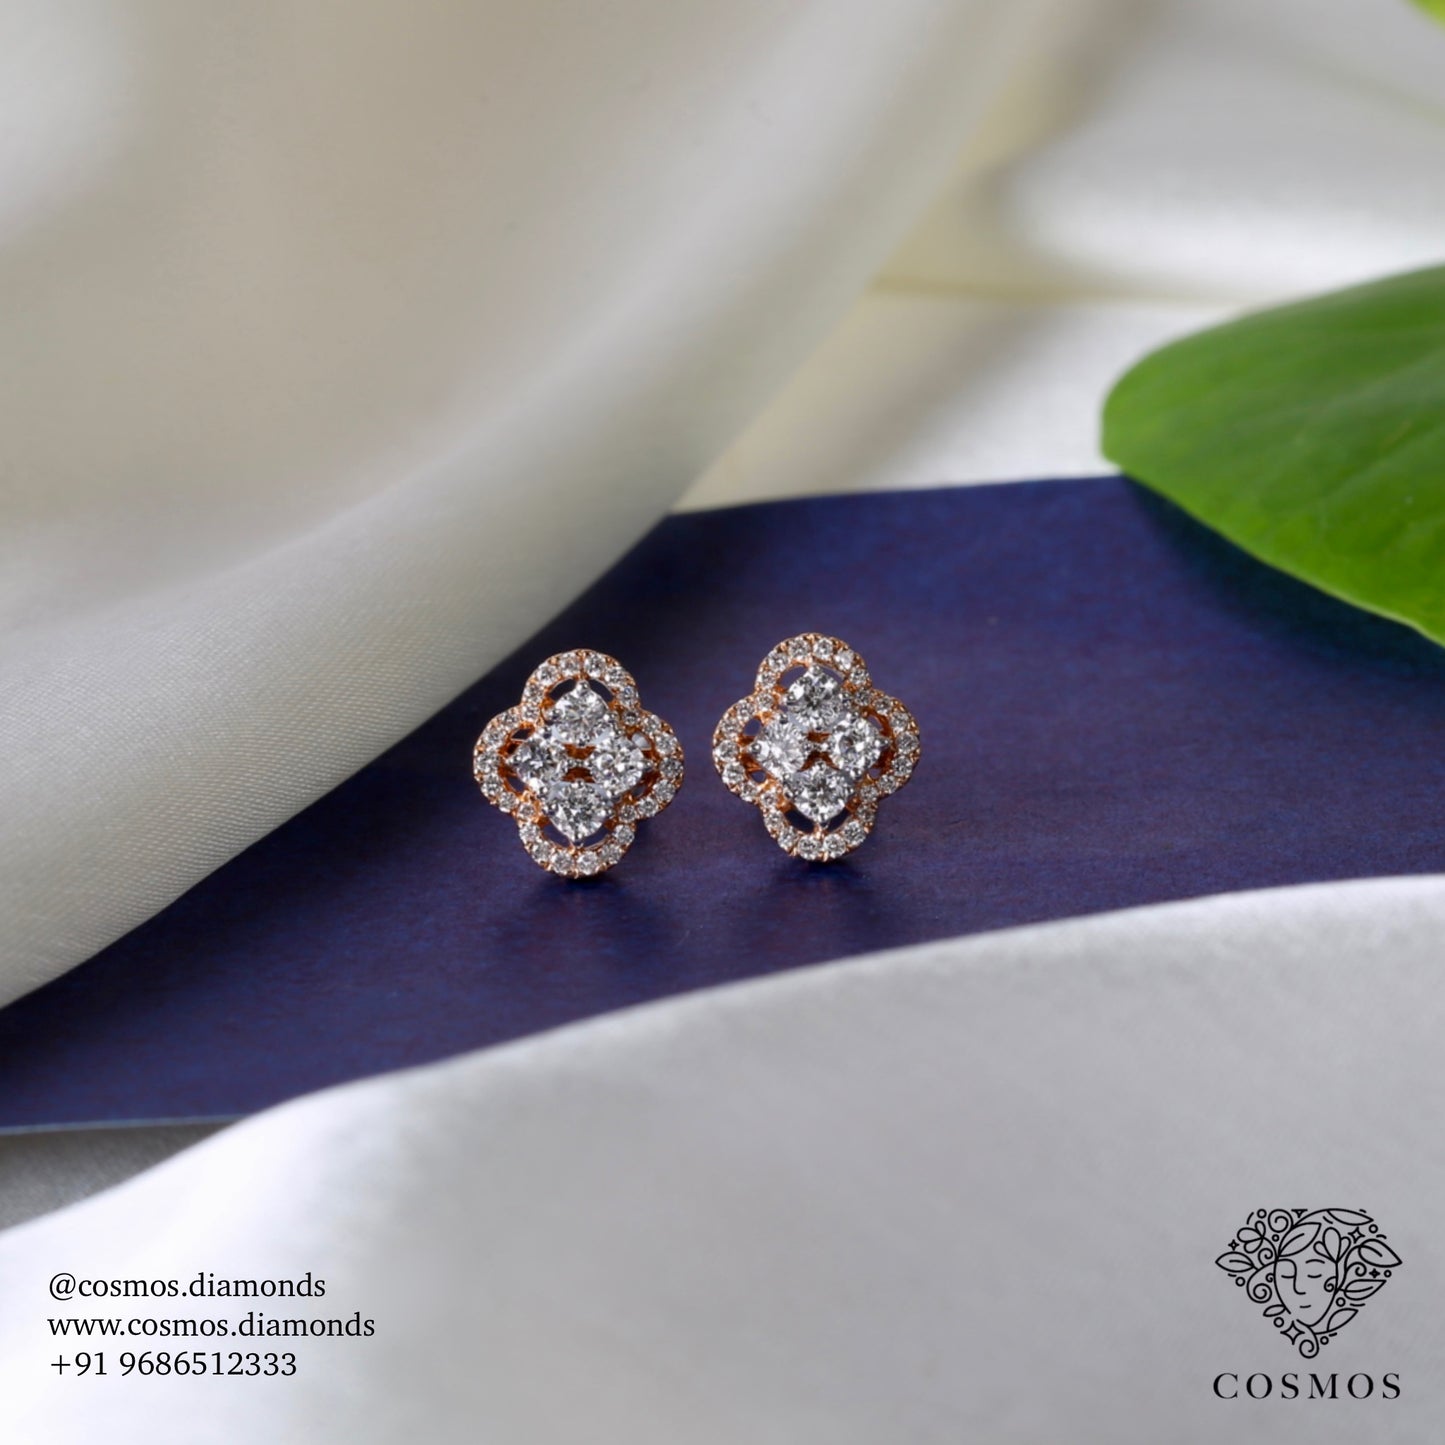 Four solitaire clover studs